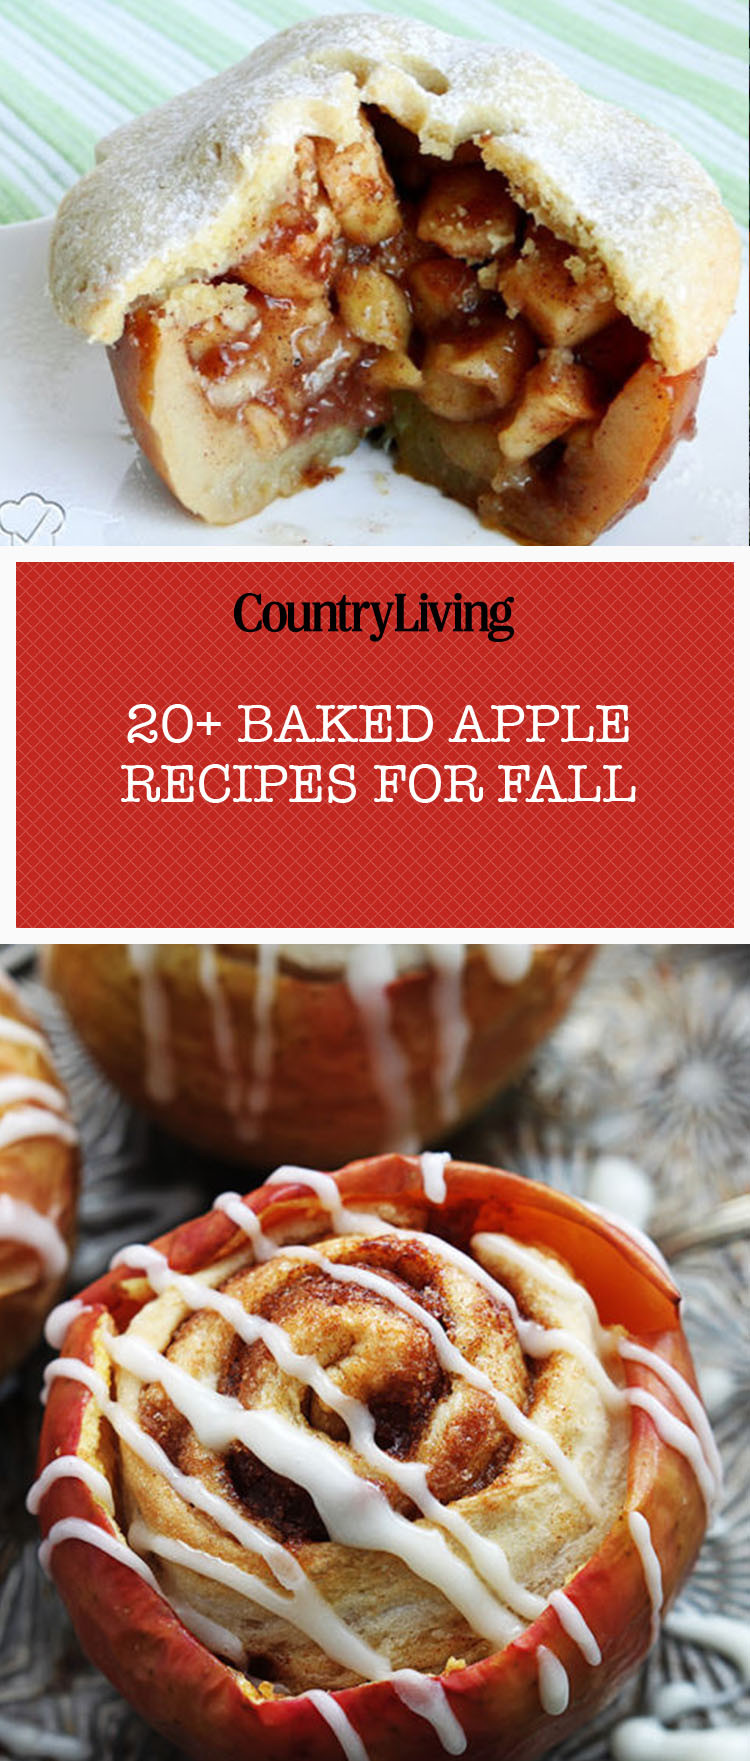 Apple Recipes For Fall
 23 Fall Baked Apple Recipes Easy Ideas for Stuffed Apples